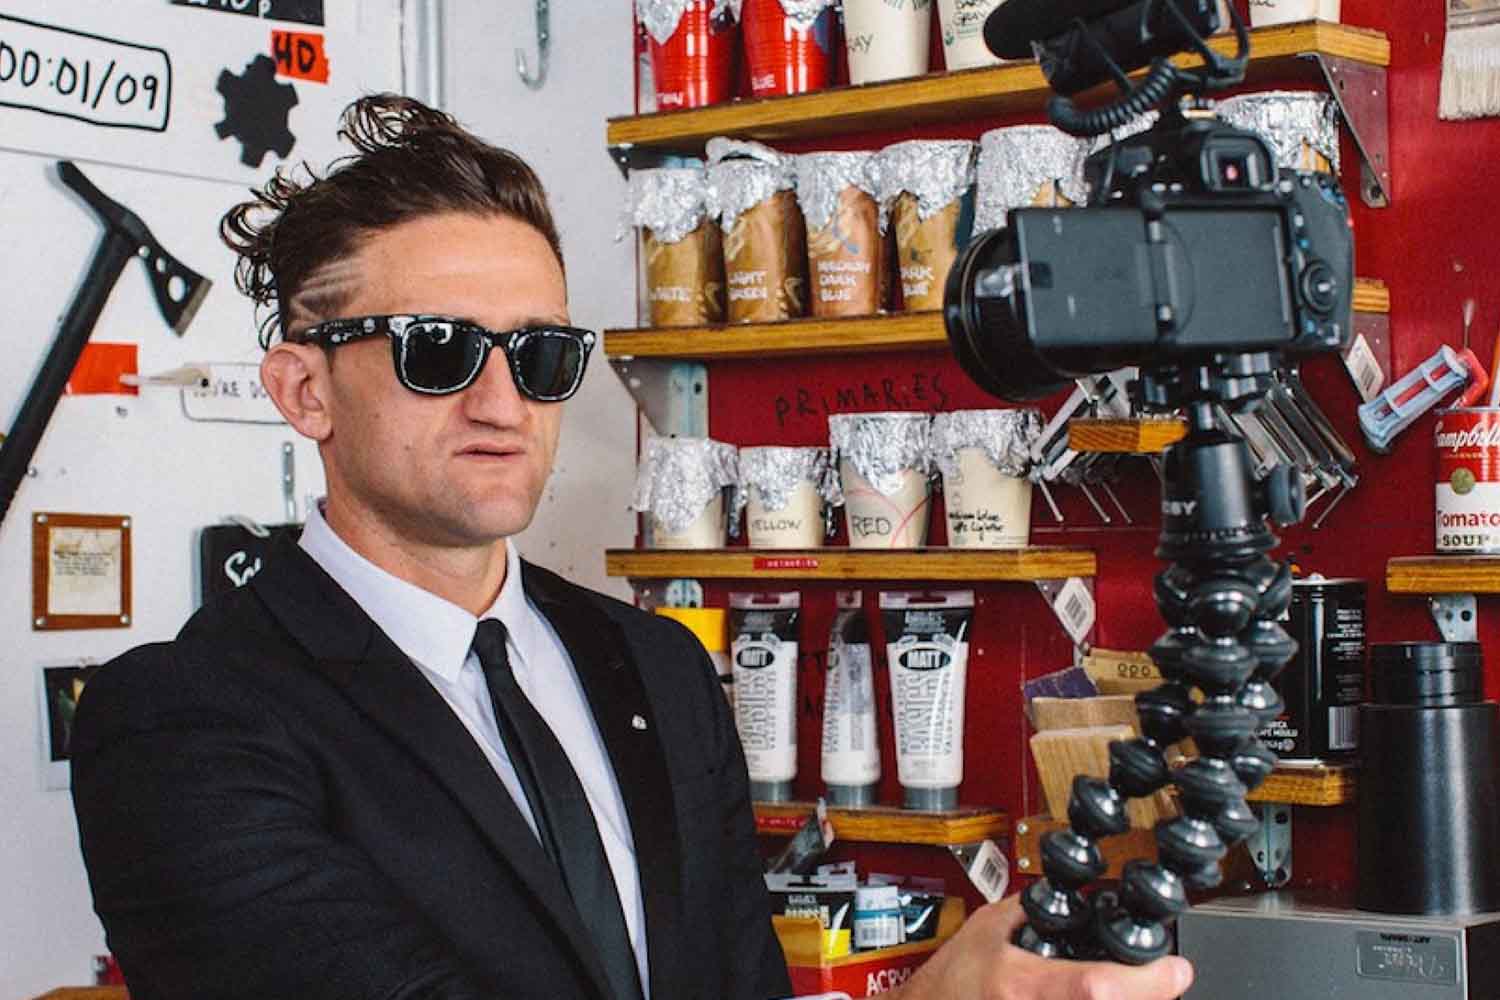 Filmmaking & Storytelling: The Casey Neistat Approach To Making Movies ...